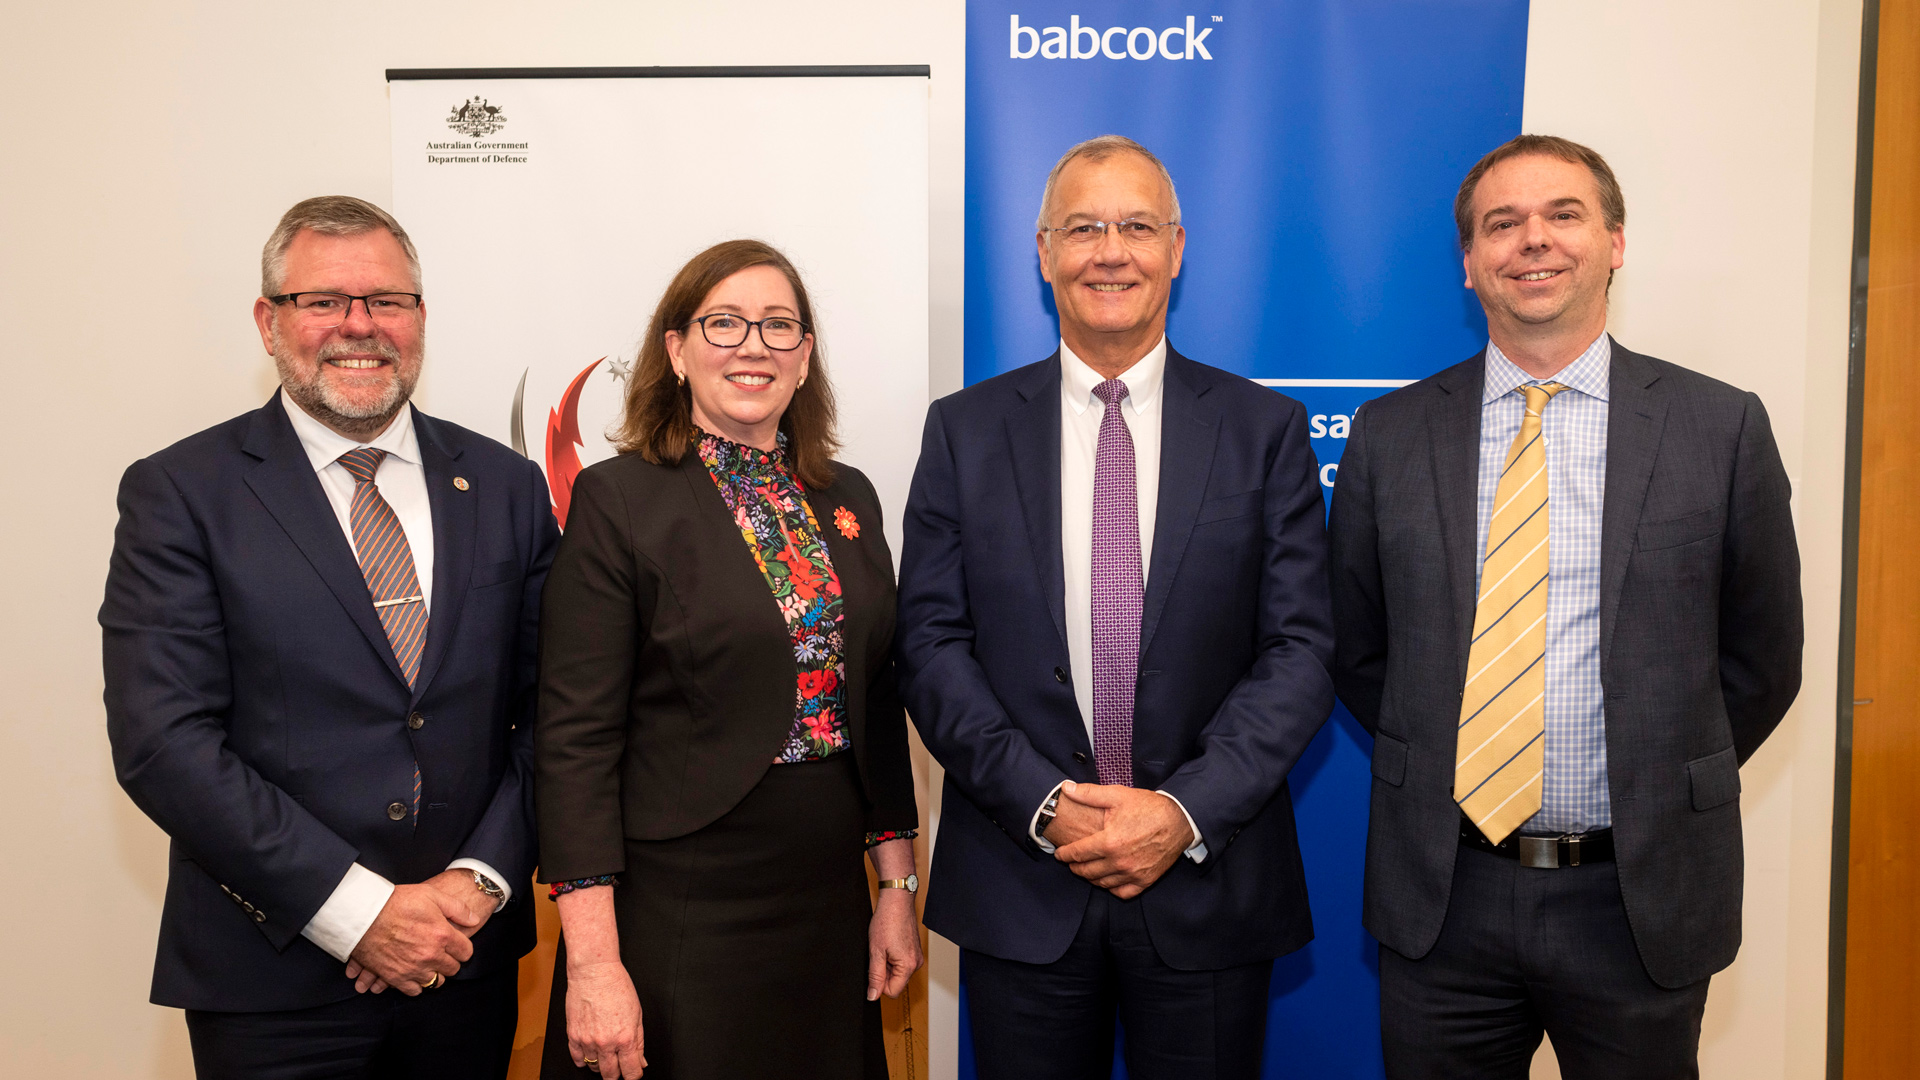 Mr Tony Burger, Ms Belinda Templeman, Mr David Ruff and Mr Andrew Cridland. The ADF’s High Frequency Communication System (DHFCS) is set for a major capability upgrade under a 10-year program to be delivered by Babcock Australasia.